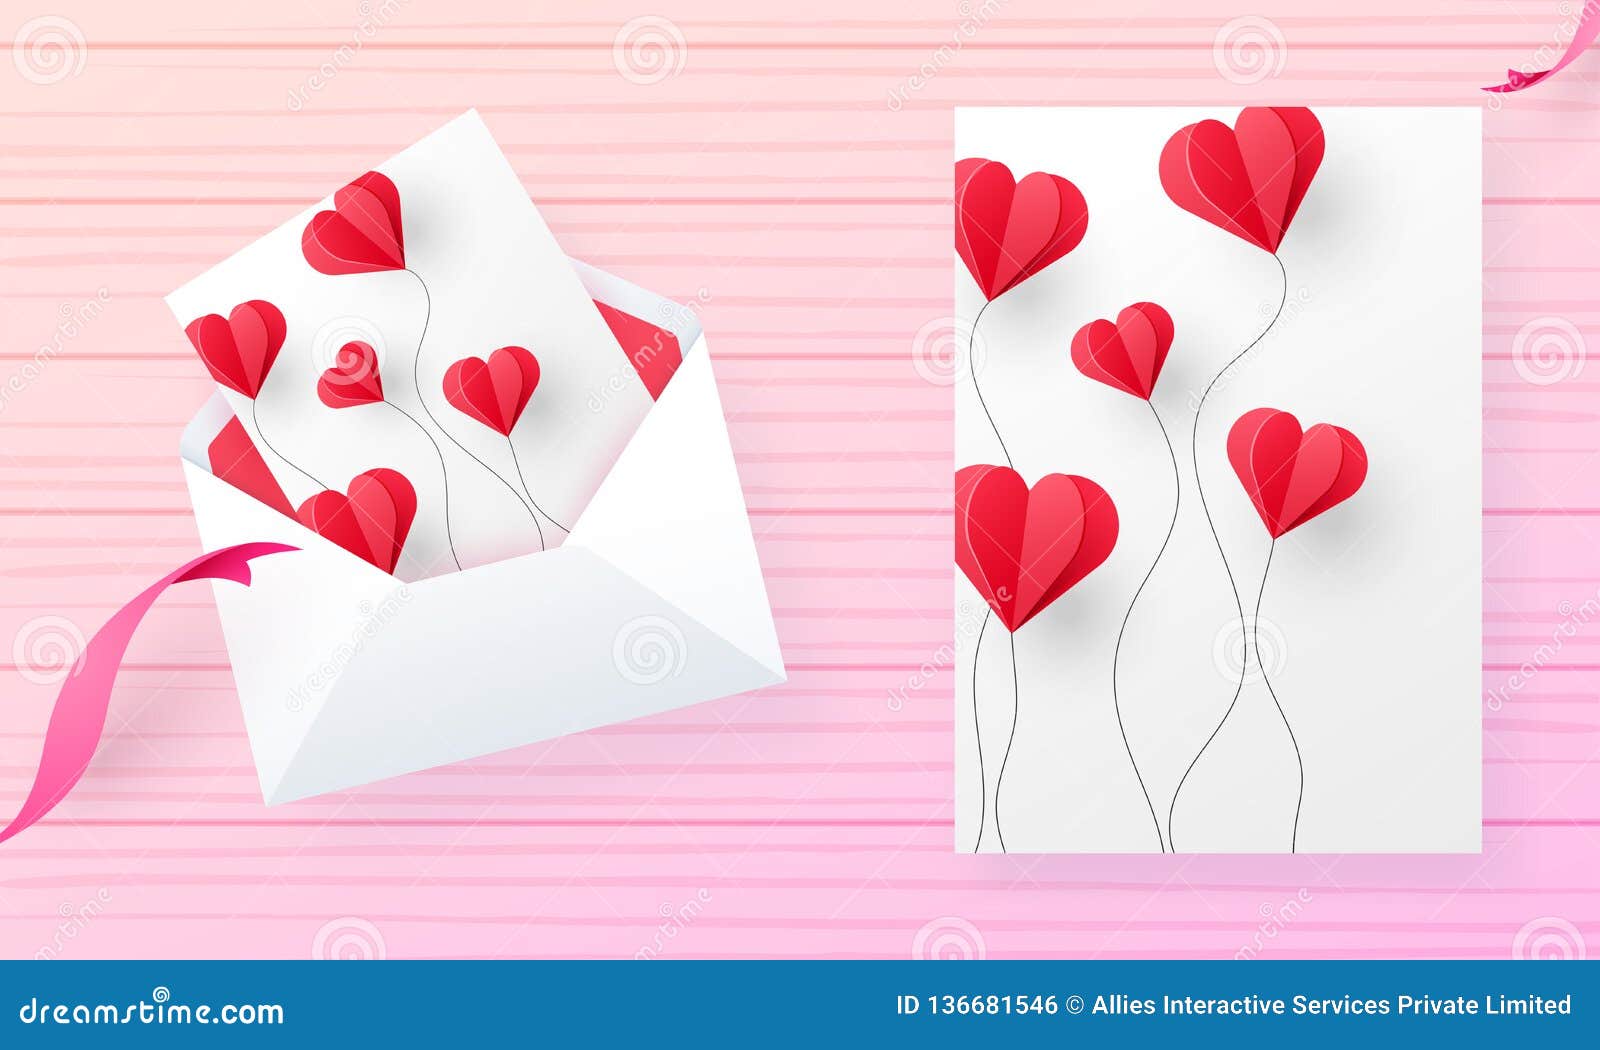 Valentine`s Day Greeting Card Design Decorated with Paper Heart ...